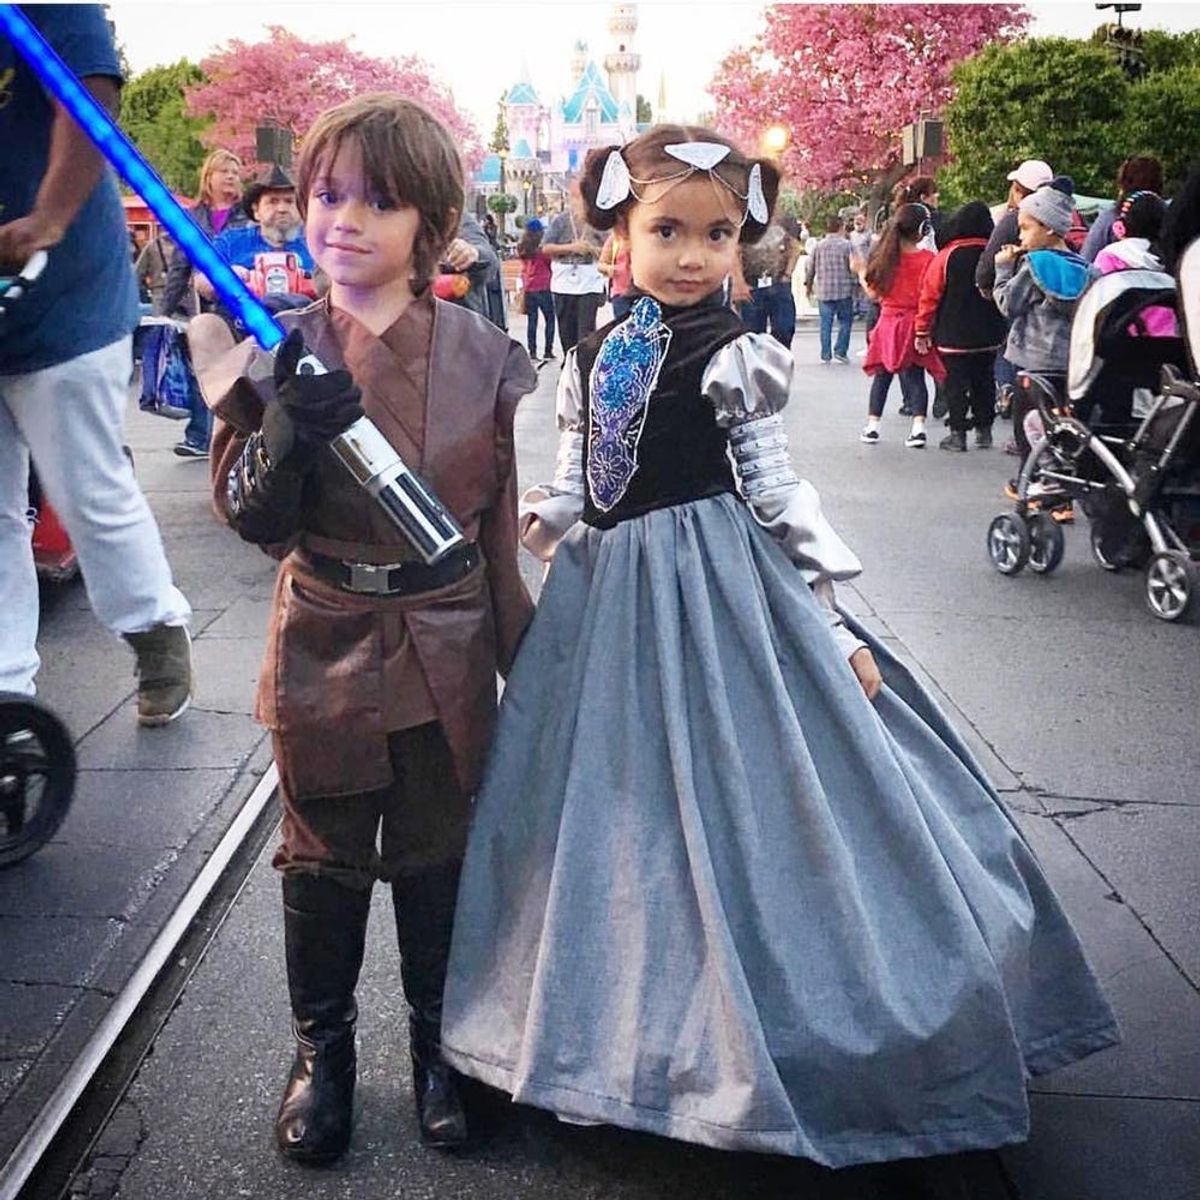 Disney Kid Cosplay Is a Thing and It’s GLORIOUS